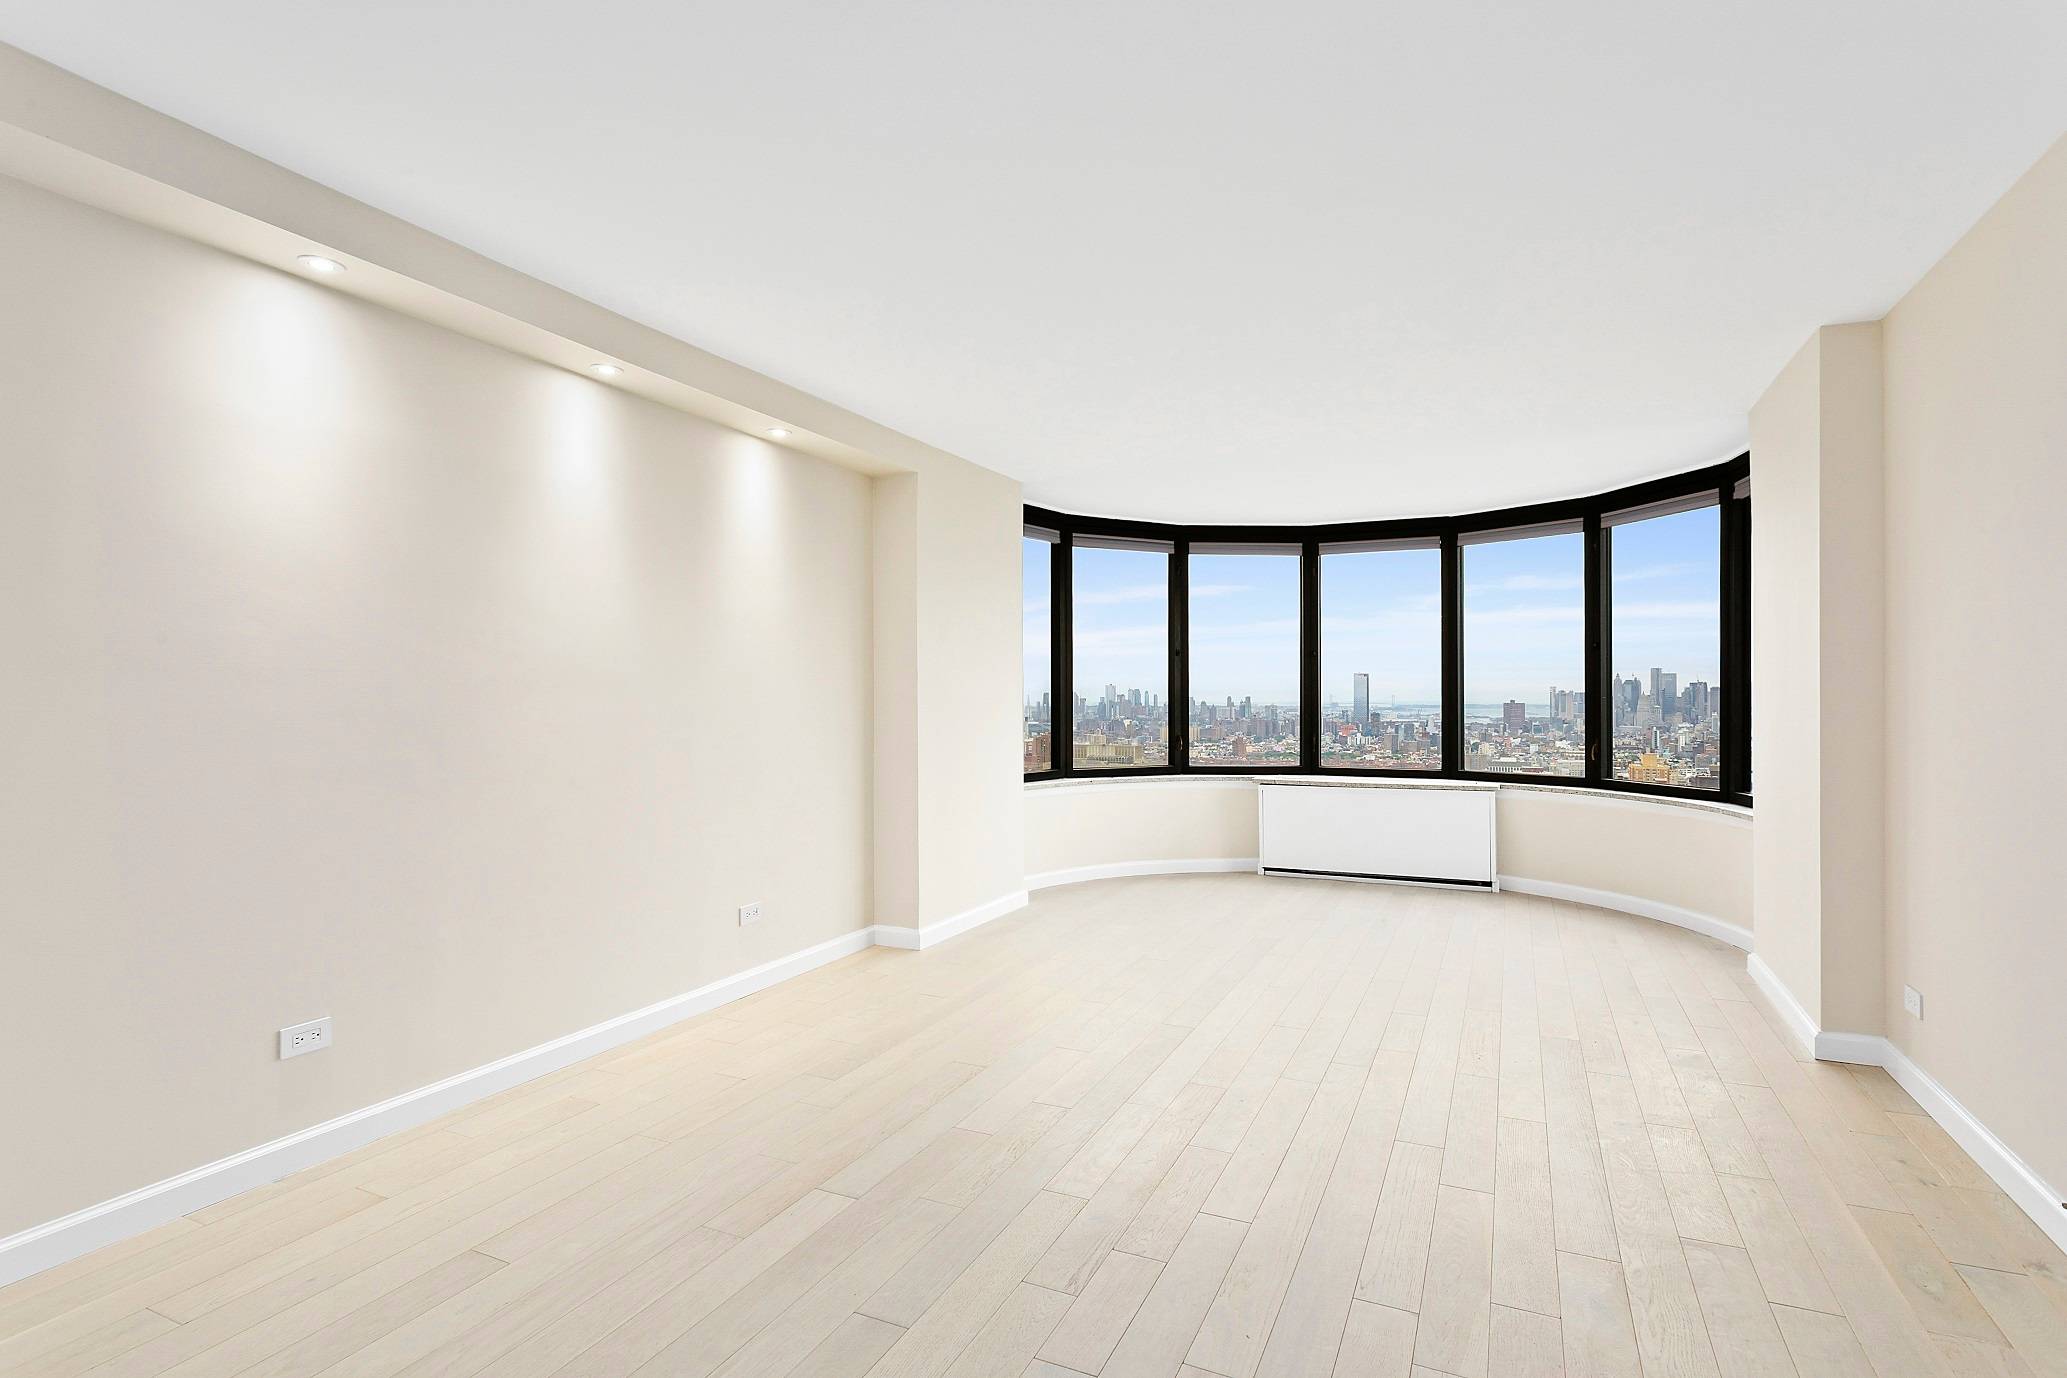 CORINTHIAN CINDO 330 E 38th St Apt 56Q NY NY 10016 Spectacular South Panoramic Manhattan skyline from this 1 bedroom 1, 5 bath Condo view, New renovated, Open kitchen, oak ...